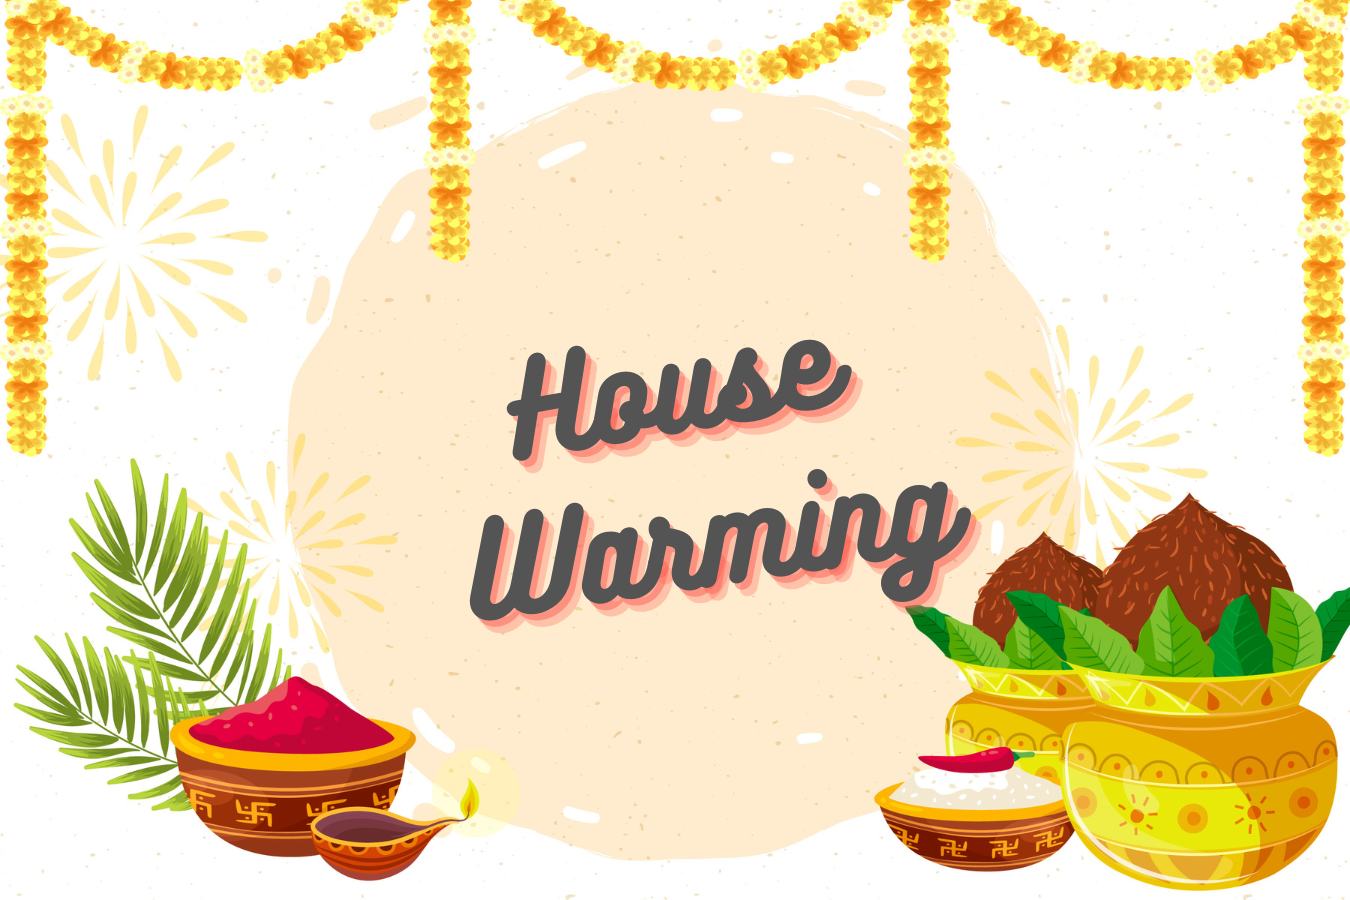 House Warming Rituals in India